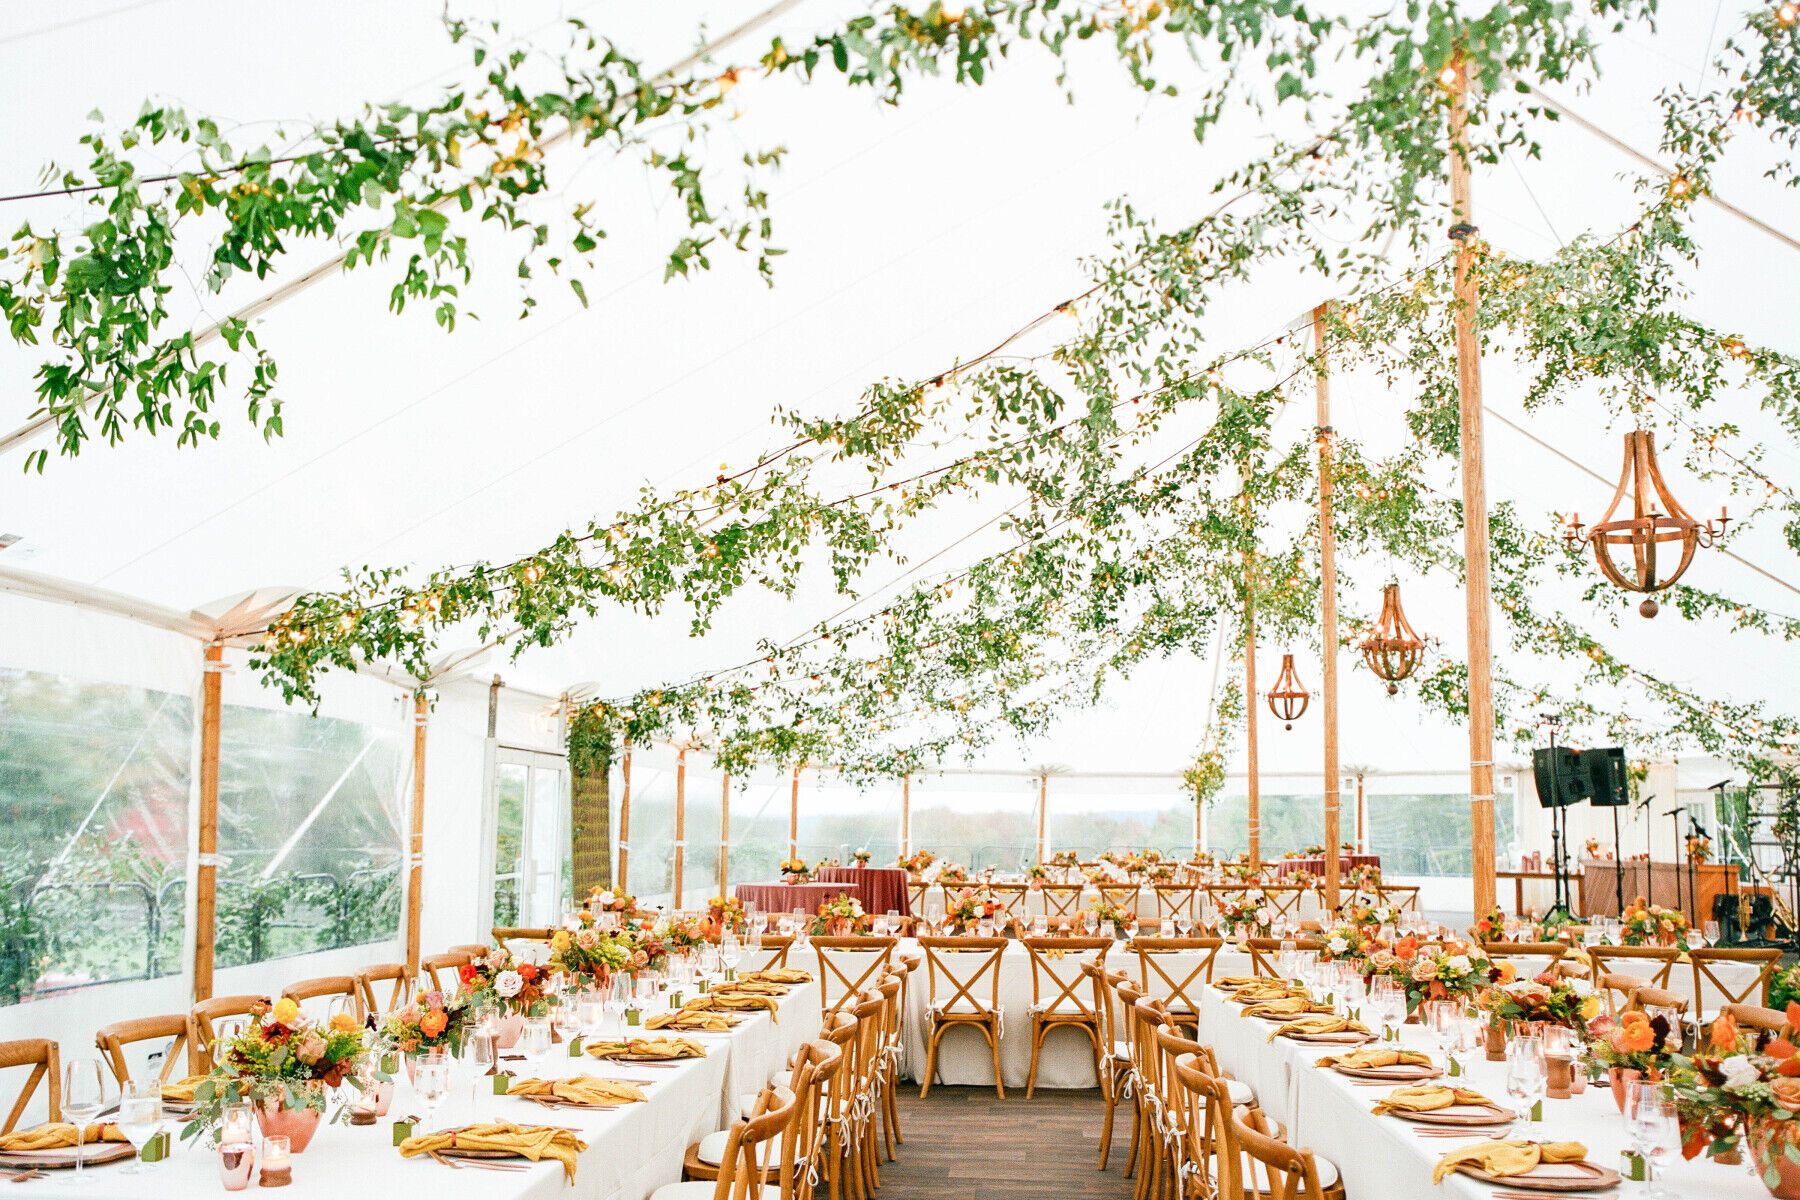 Tented Wedding Ideas: Inside of a tented wedding reception, bright white tent with foliage ceiling decor